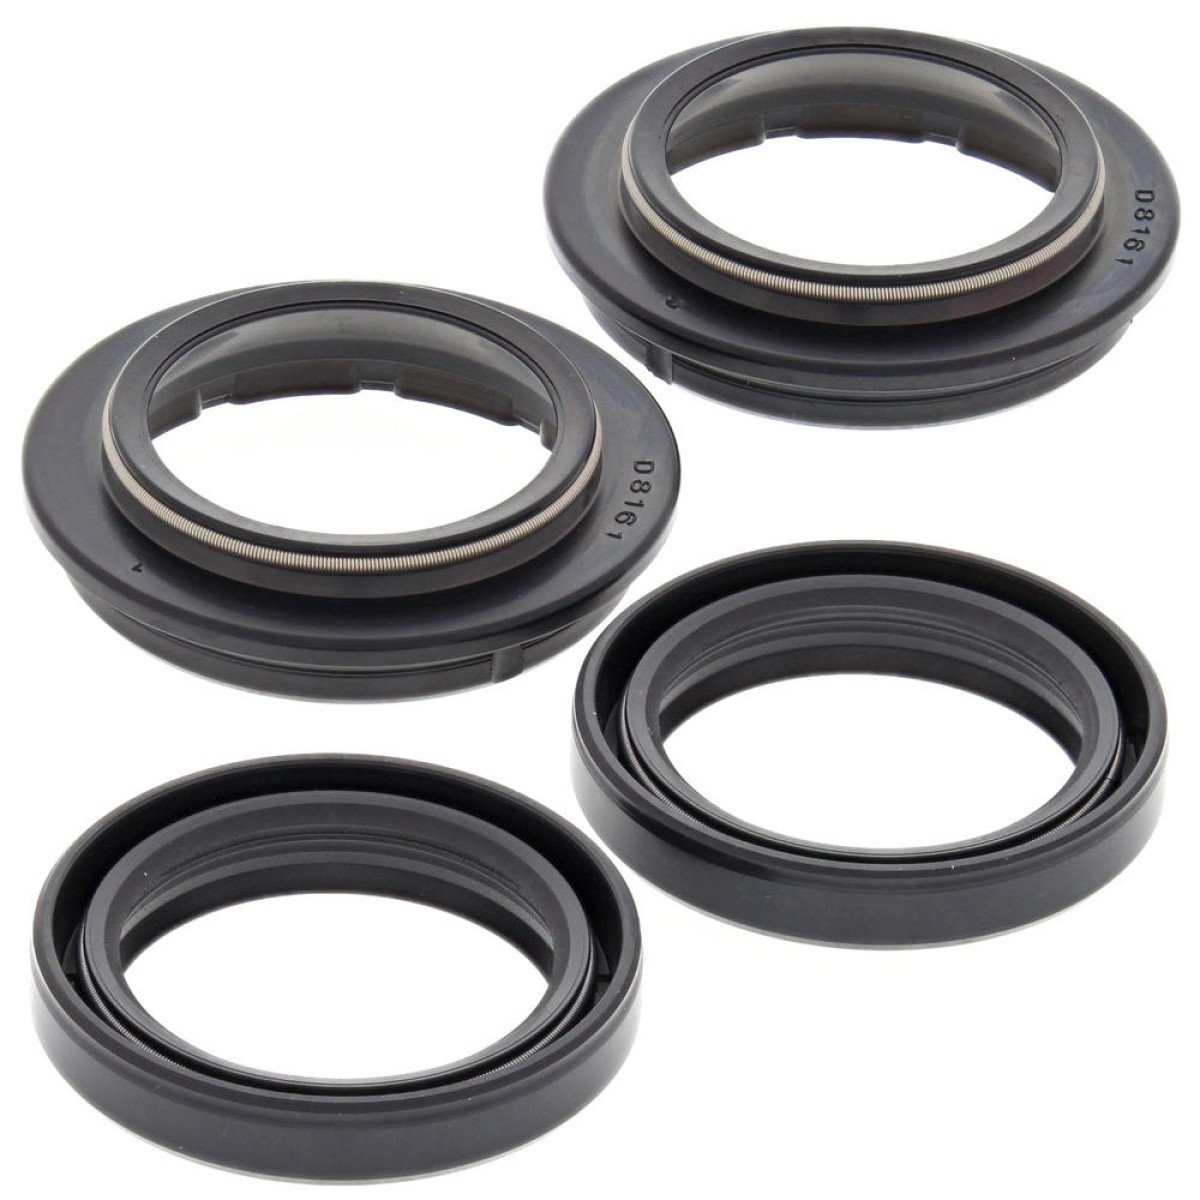 Moose Racing Fork Seal Kit  with Dust Cap, KTM SX 60 99-00, SX 65 00-01, 32 x 42.05/42.2 x 6.5/9 mm